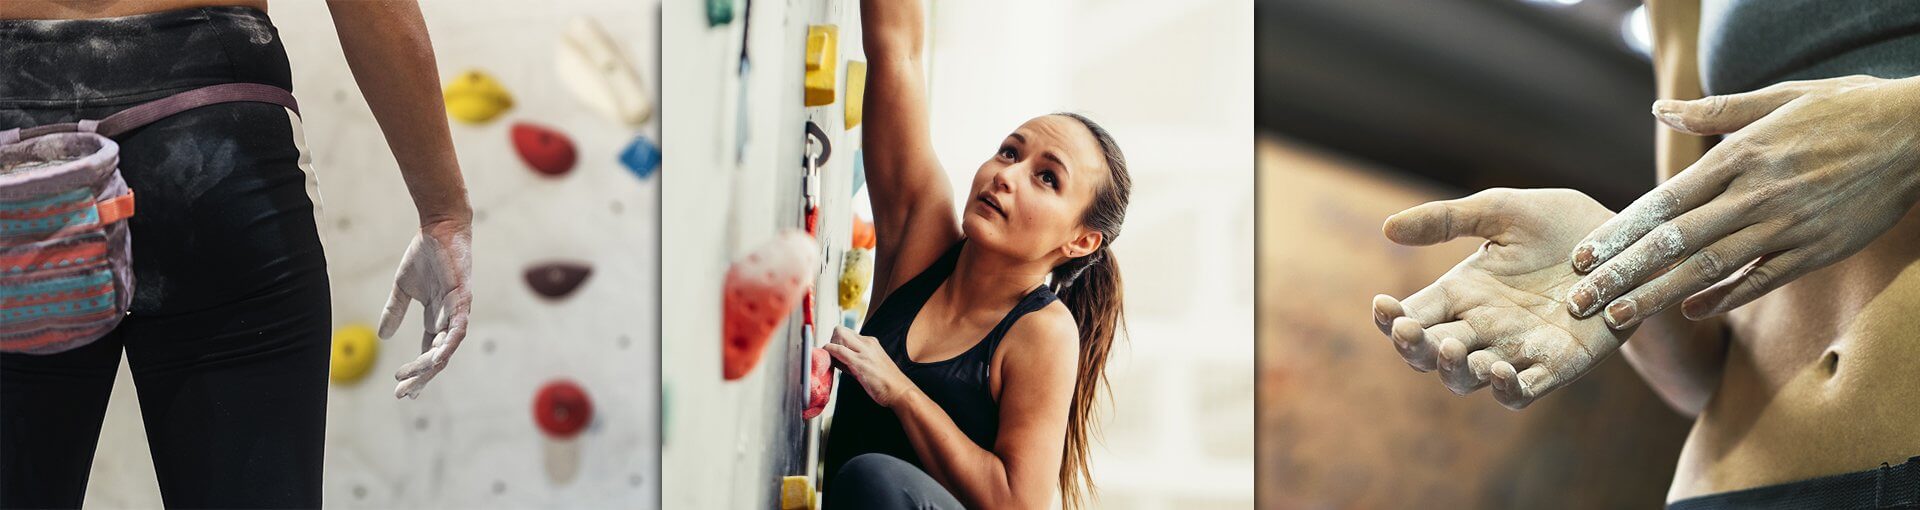 Pull-up Bar Exercises for Climbers - Rock+Run